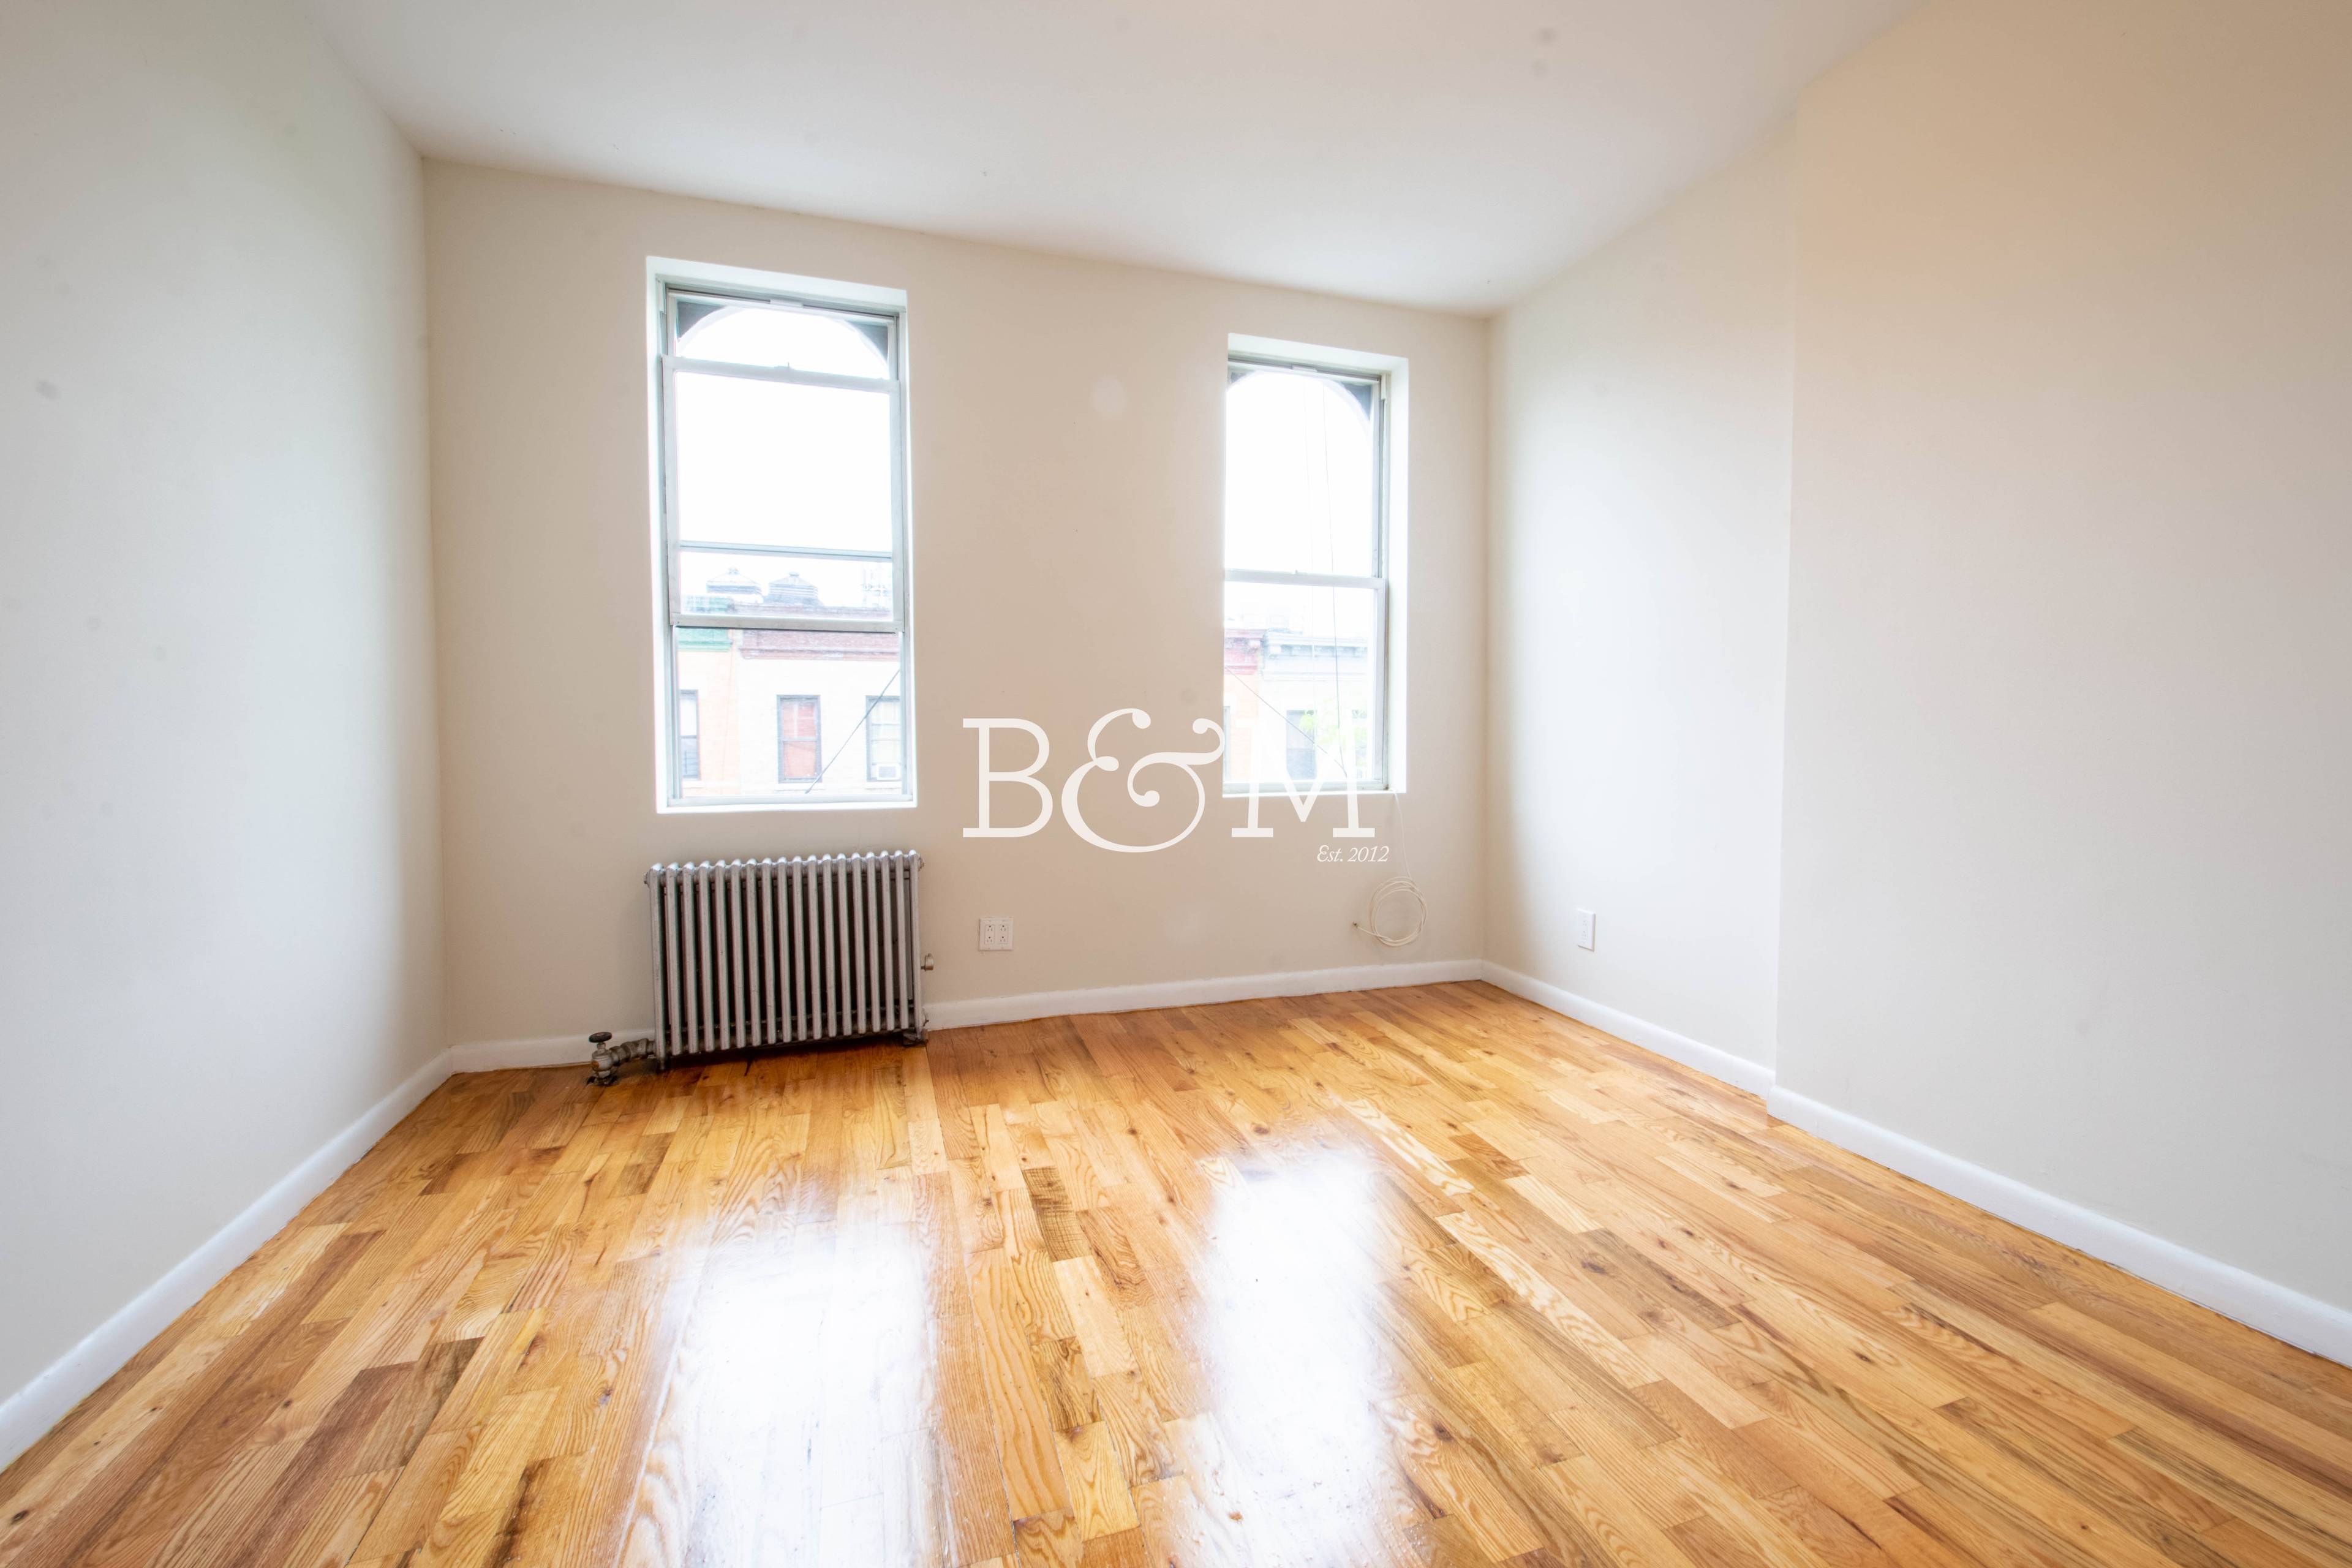 Our Thoughts This spacious two bedroom apartment features hardwood flooring throughout and tons of natural light.